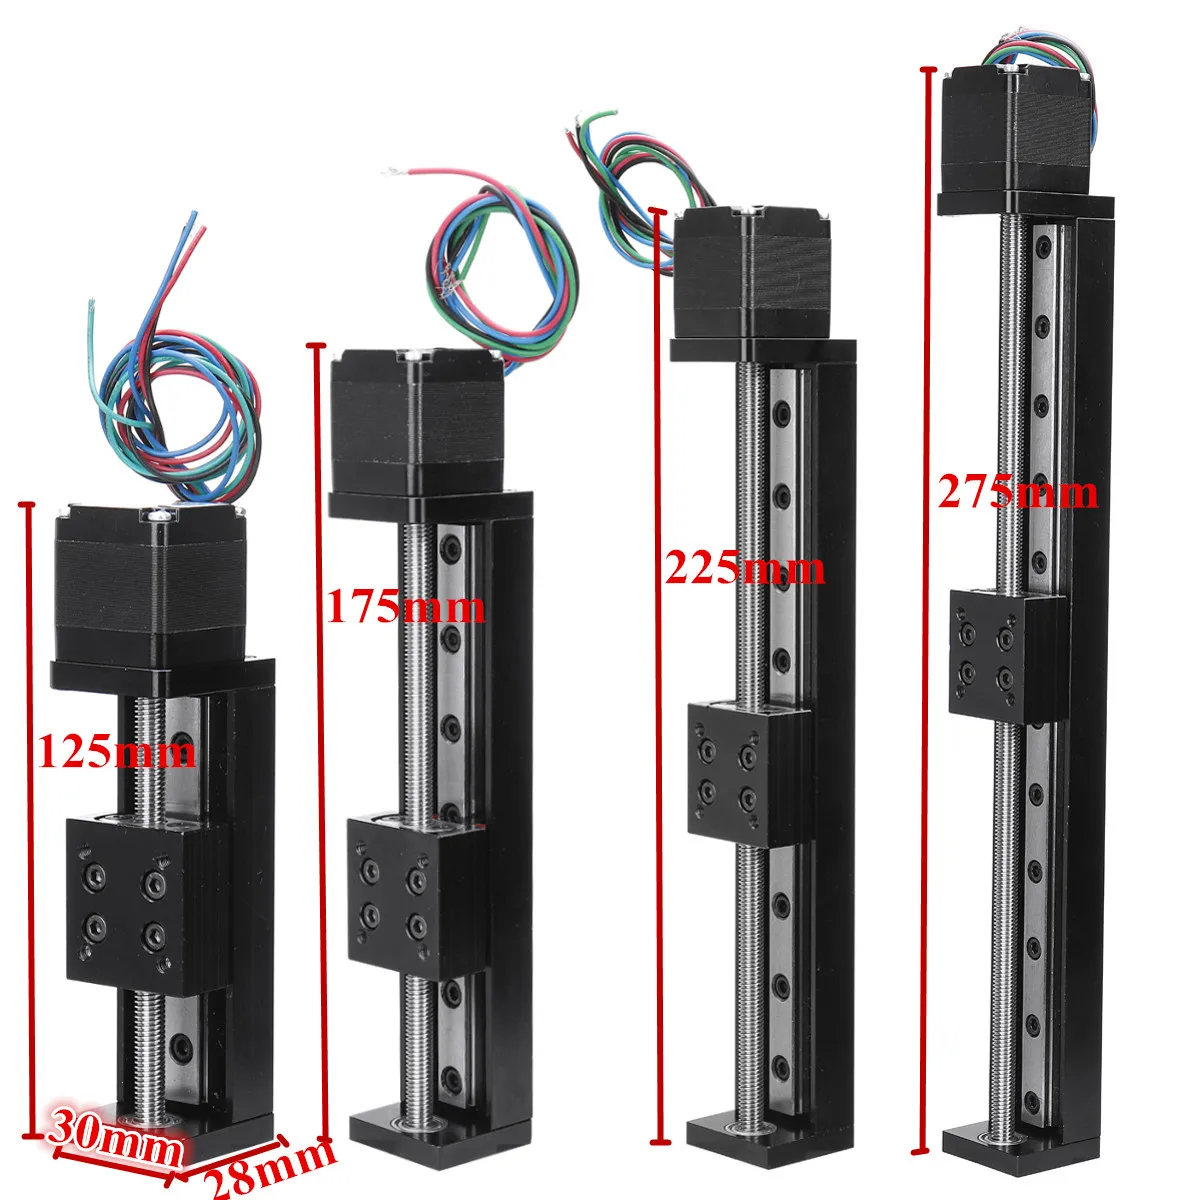 

CNC Linear Guide Stage Rail Motion Slide Stage Actuator 100mm T6*2 Motor Stepper Stroke Actuator for 3D Printer XYZ